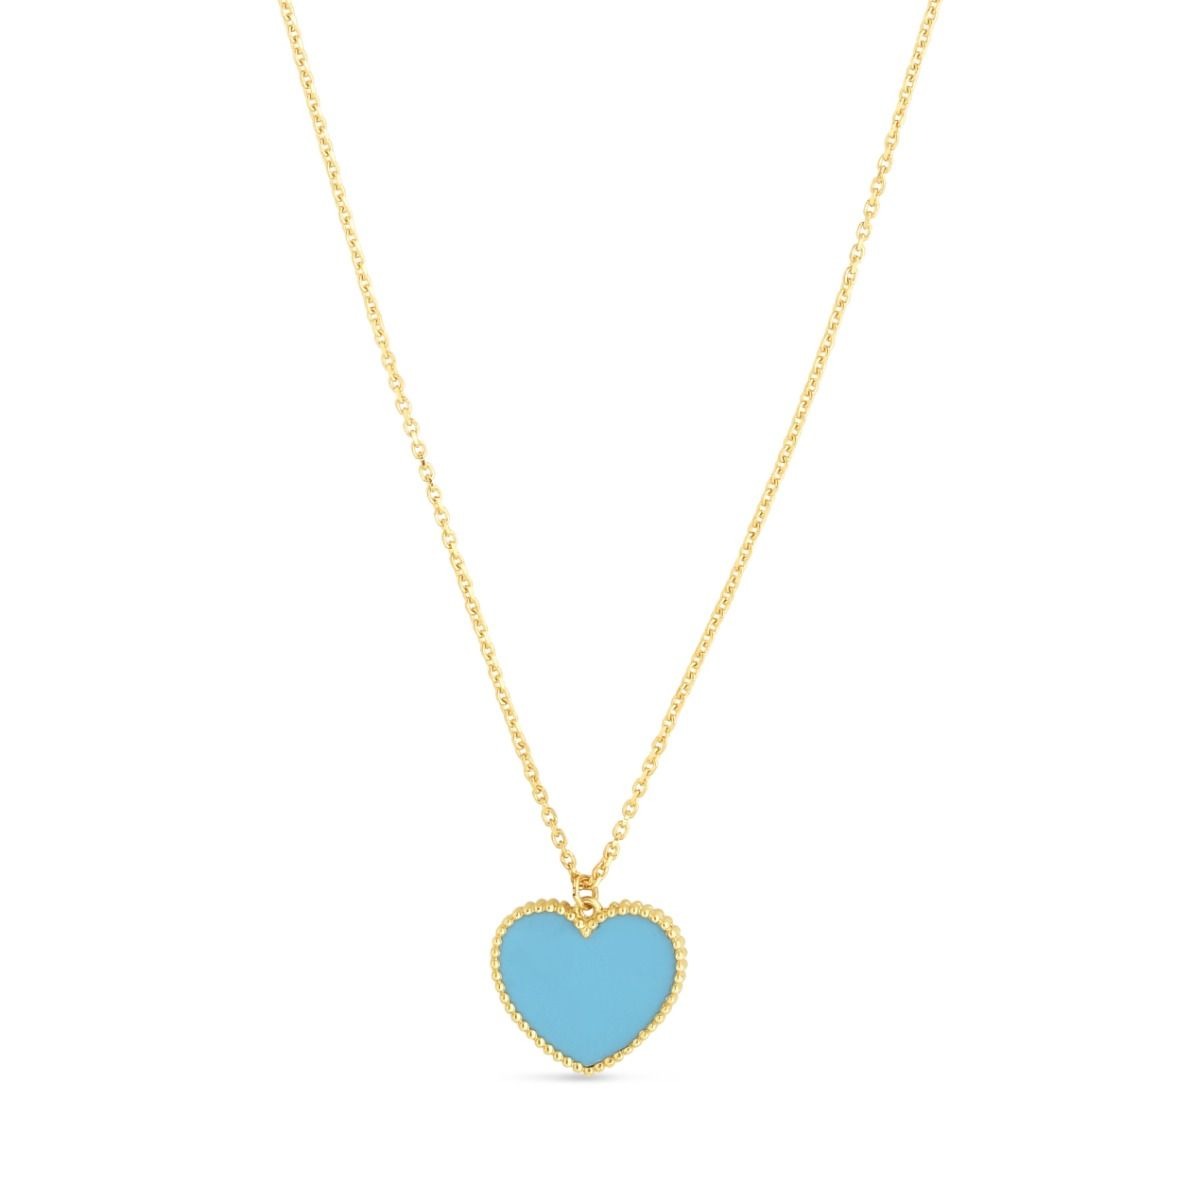 Yellow Gold Turquoise Heart Necklace l 18 inches